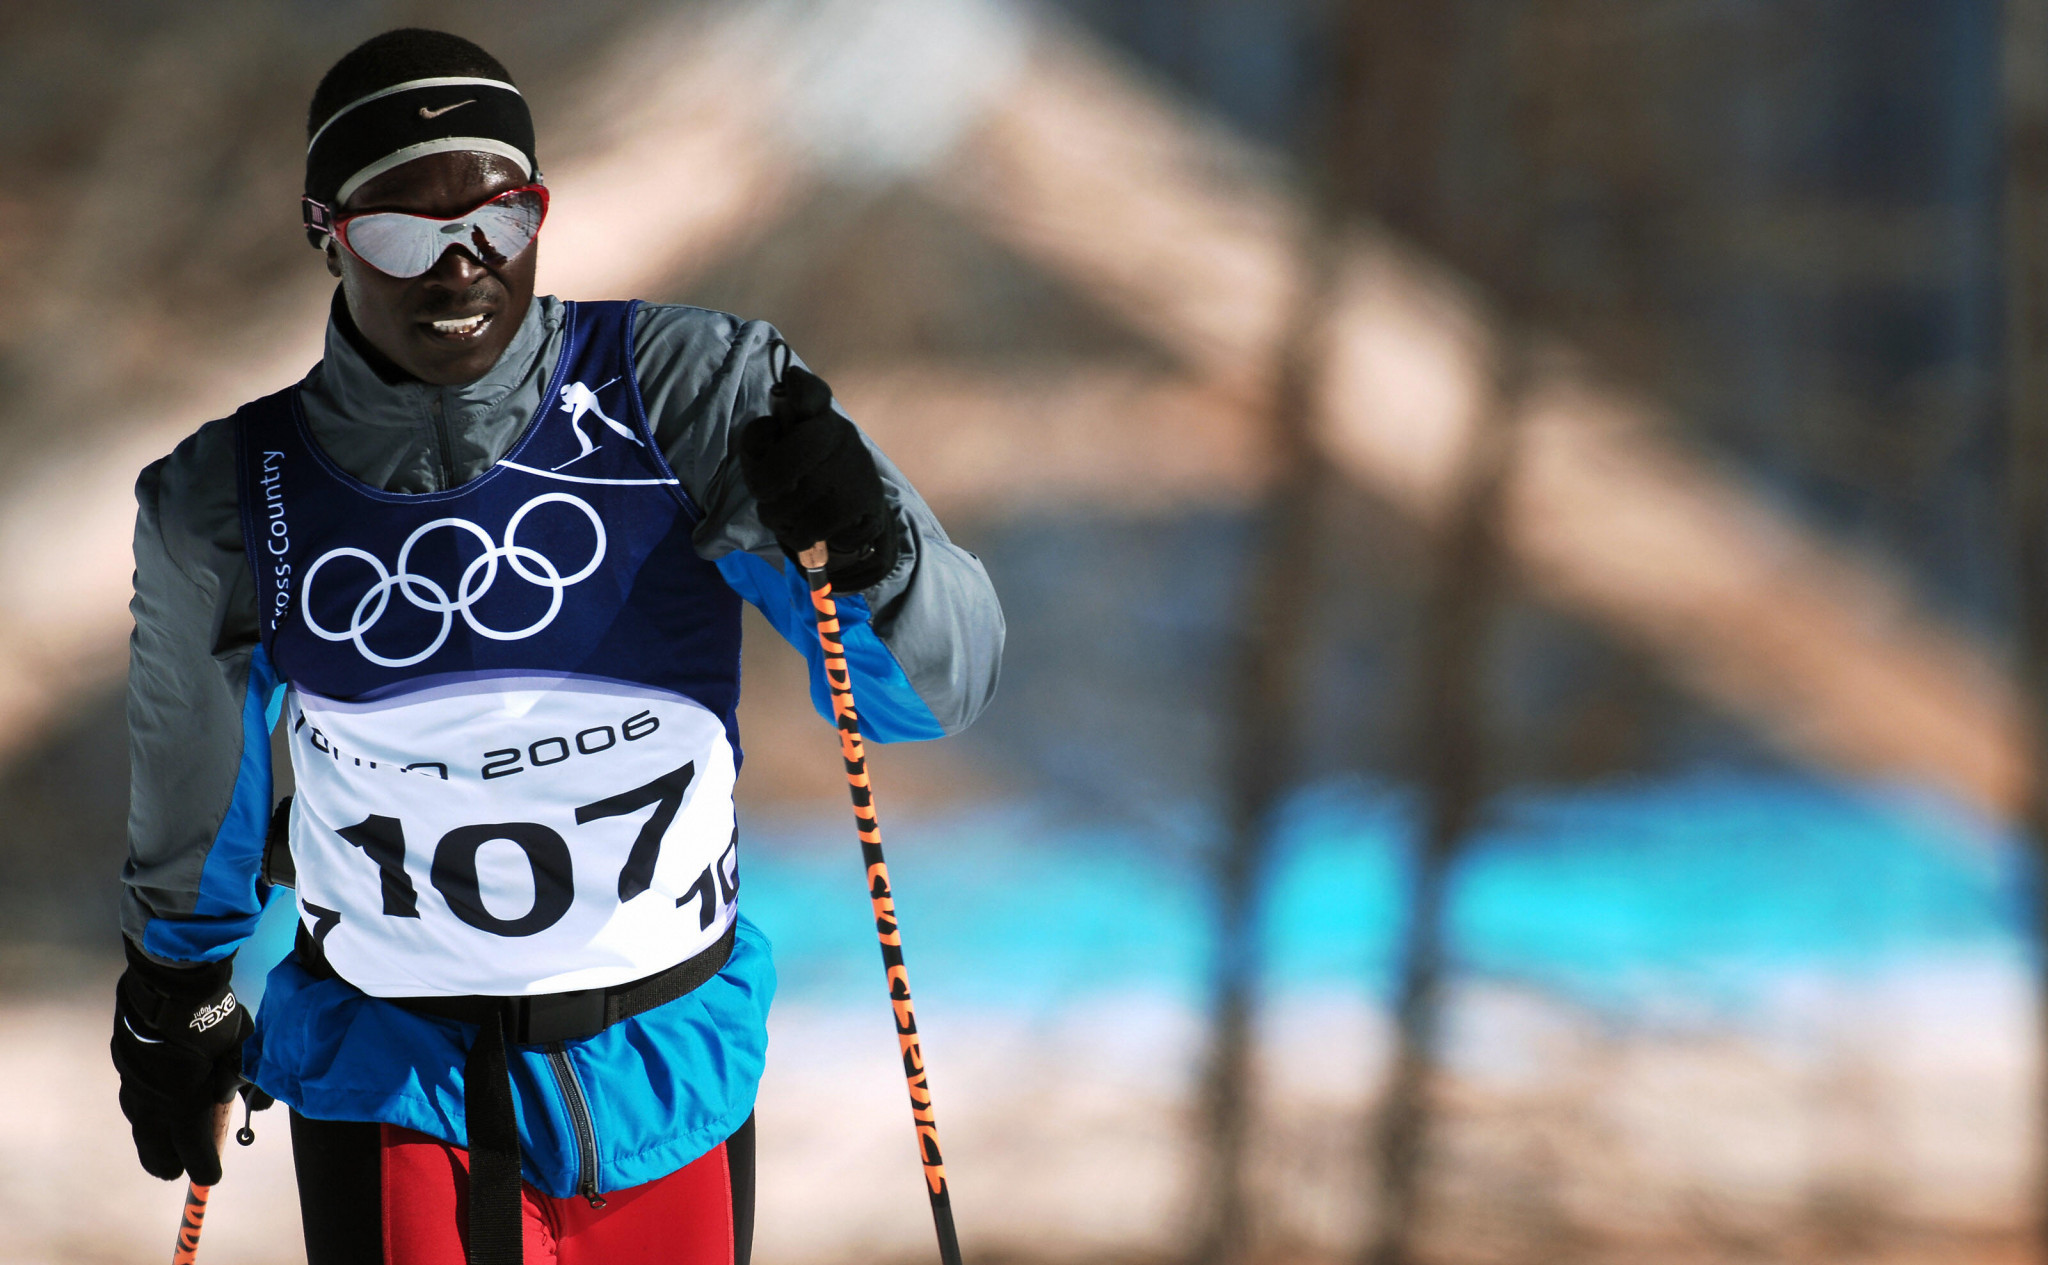 Cross-country skier Philip Boit became the first Kenyan to take part in the Winter Olympics when he competed in three Games from 1998 to 2006 © Getty Images